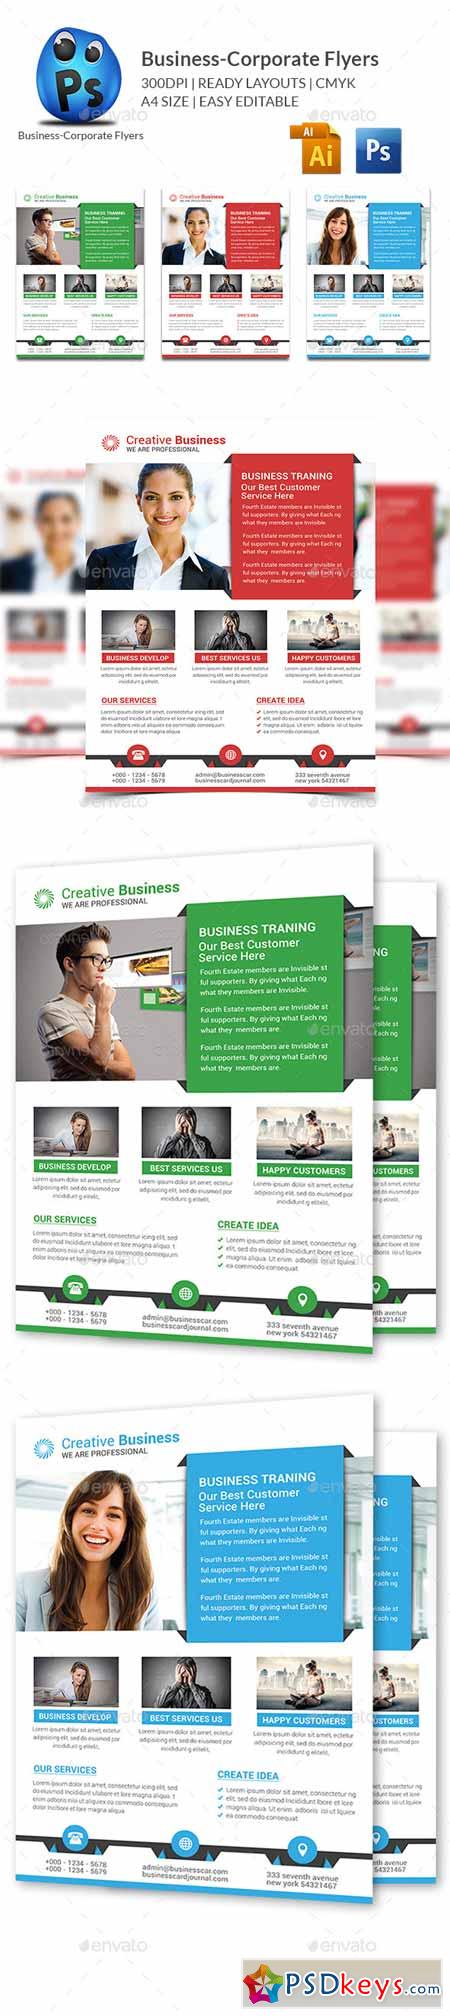 Corporate Business Flyer Template 10995440